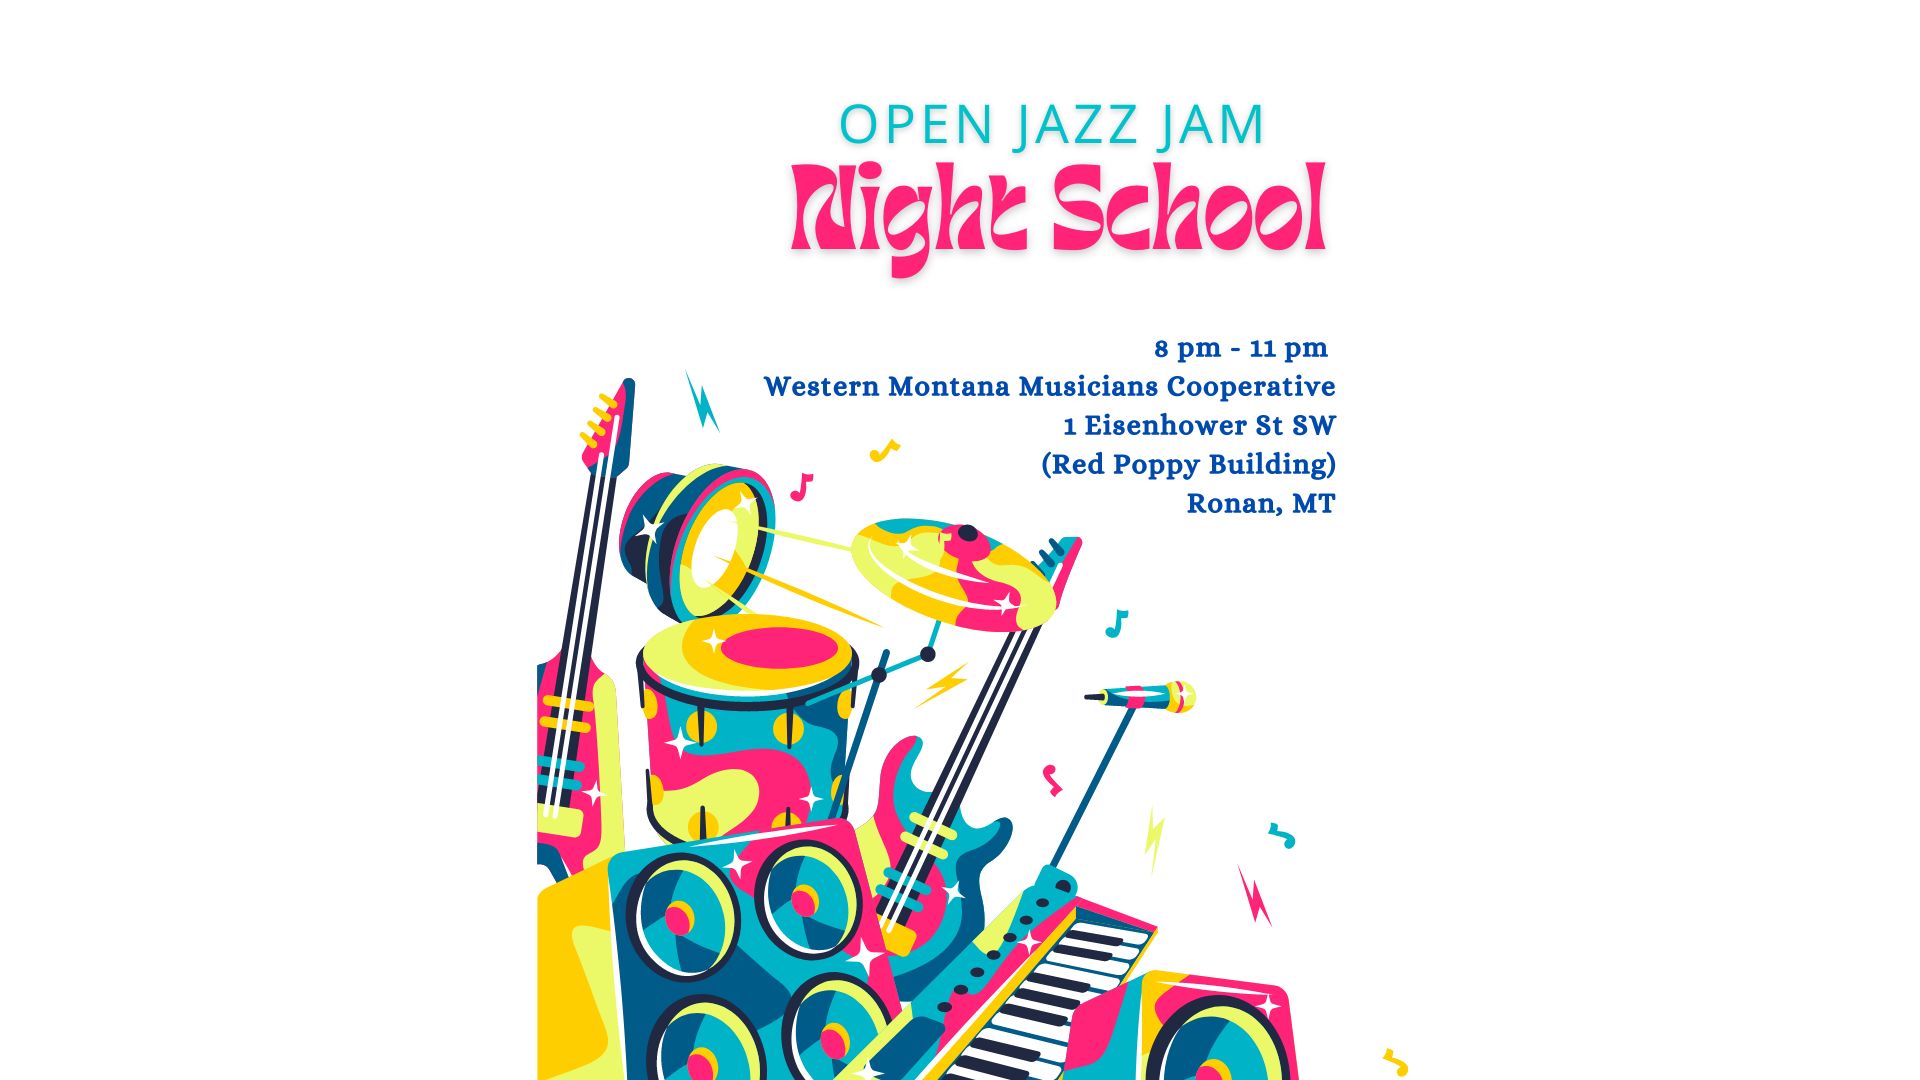 Open "Night School" Jazz Jam with Western Montana Musicians Cooperative 8:00 pm to 11:00 pm the fourth Wednesday each month at The Red Poppy in Ronan